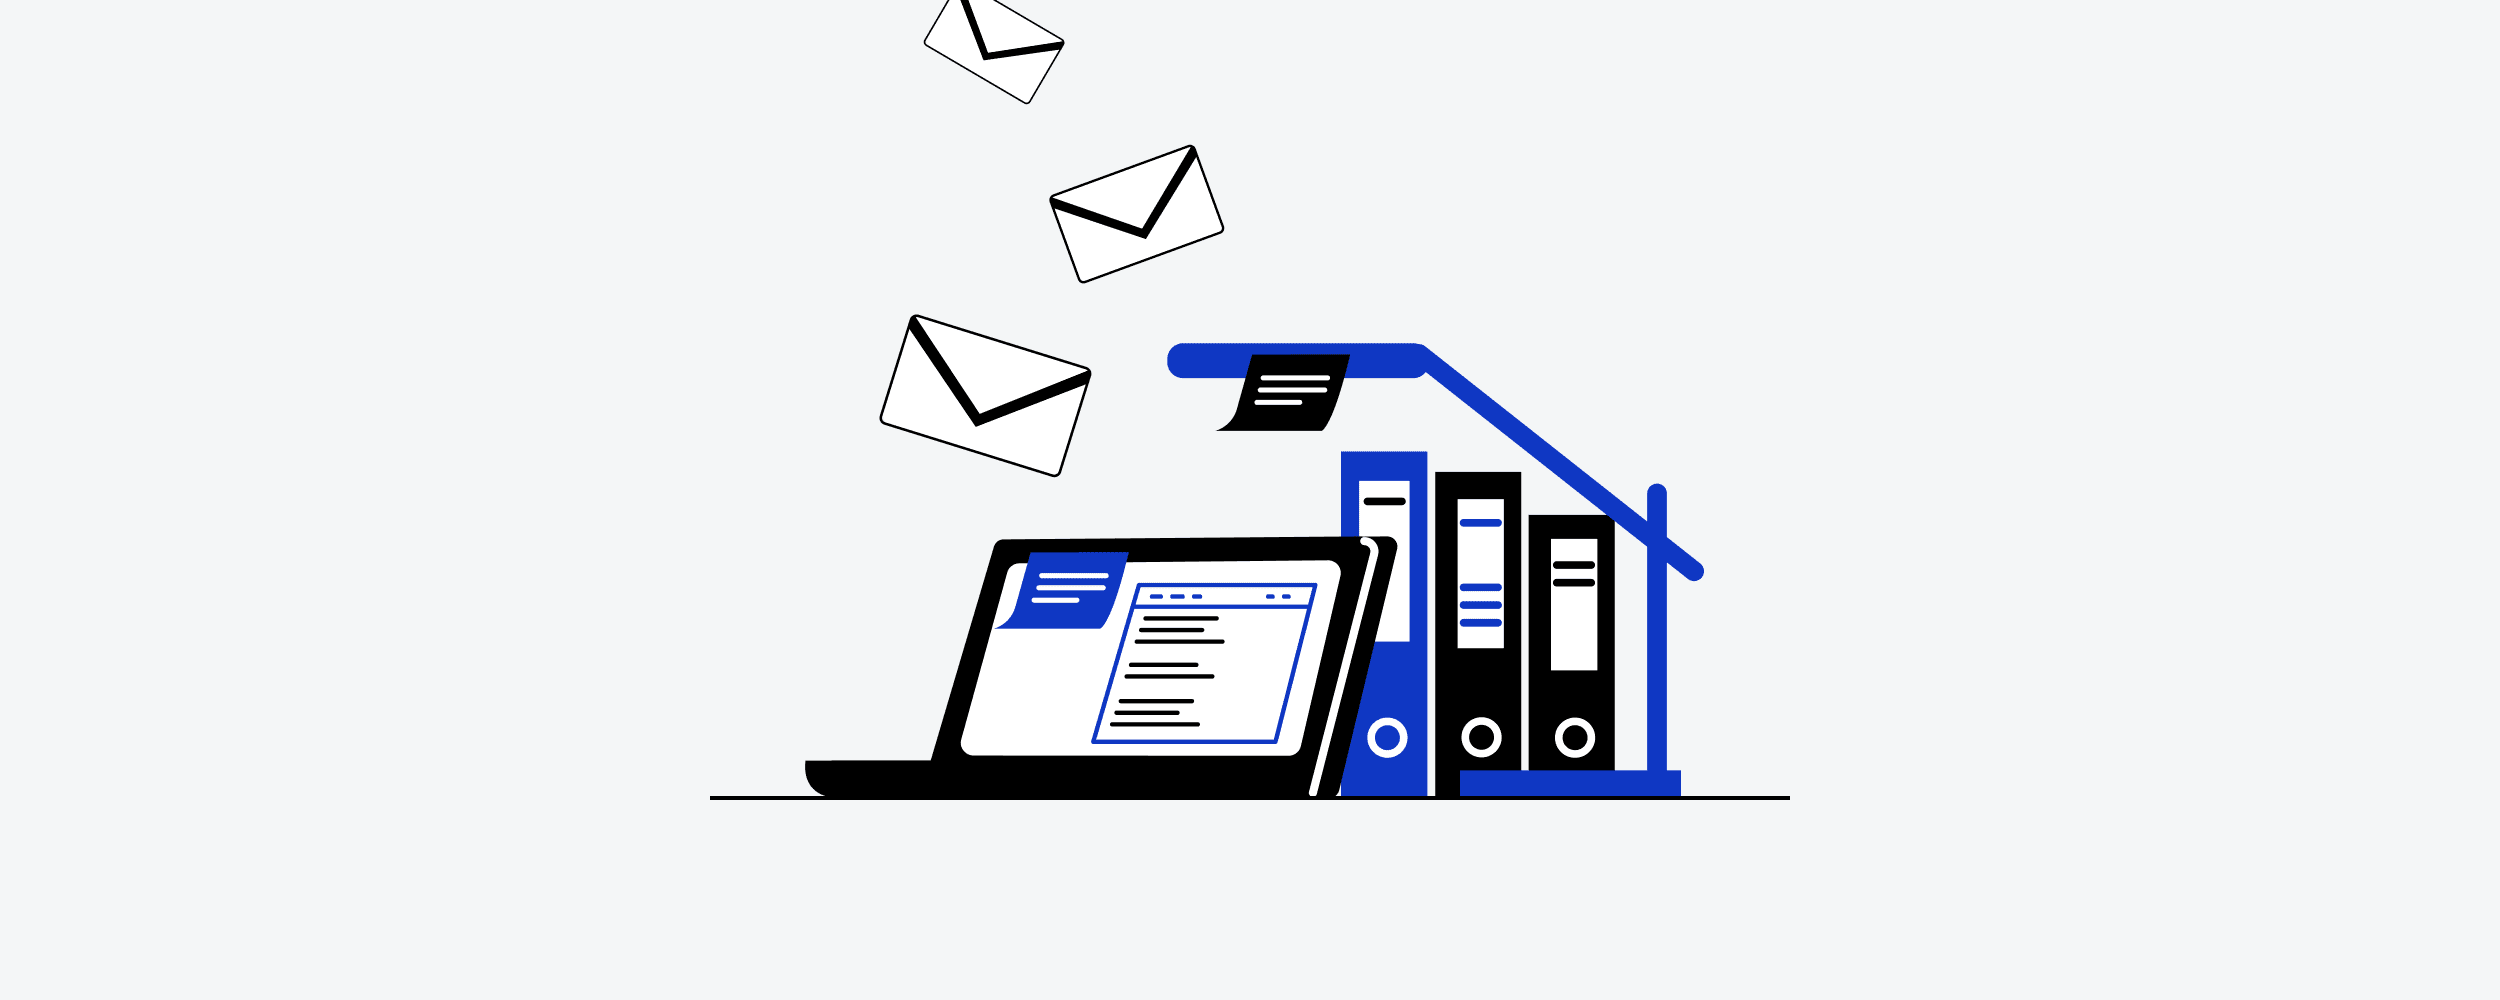 Small Business Email Providers: An Overview of the Top 8 Services